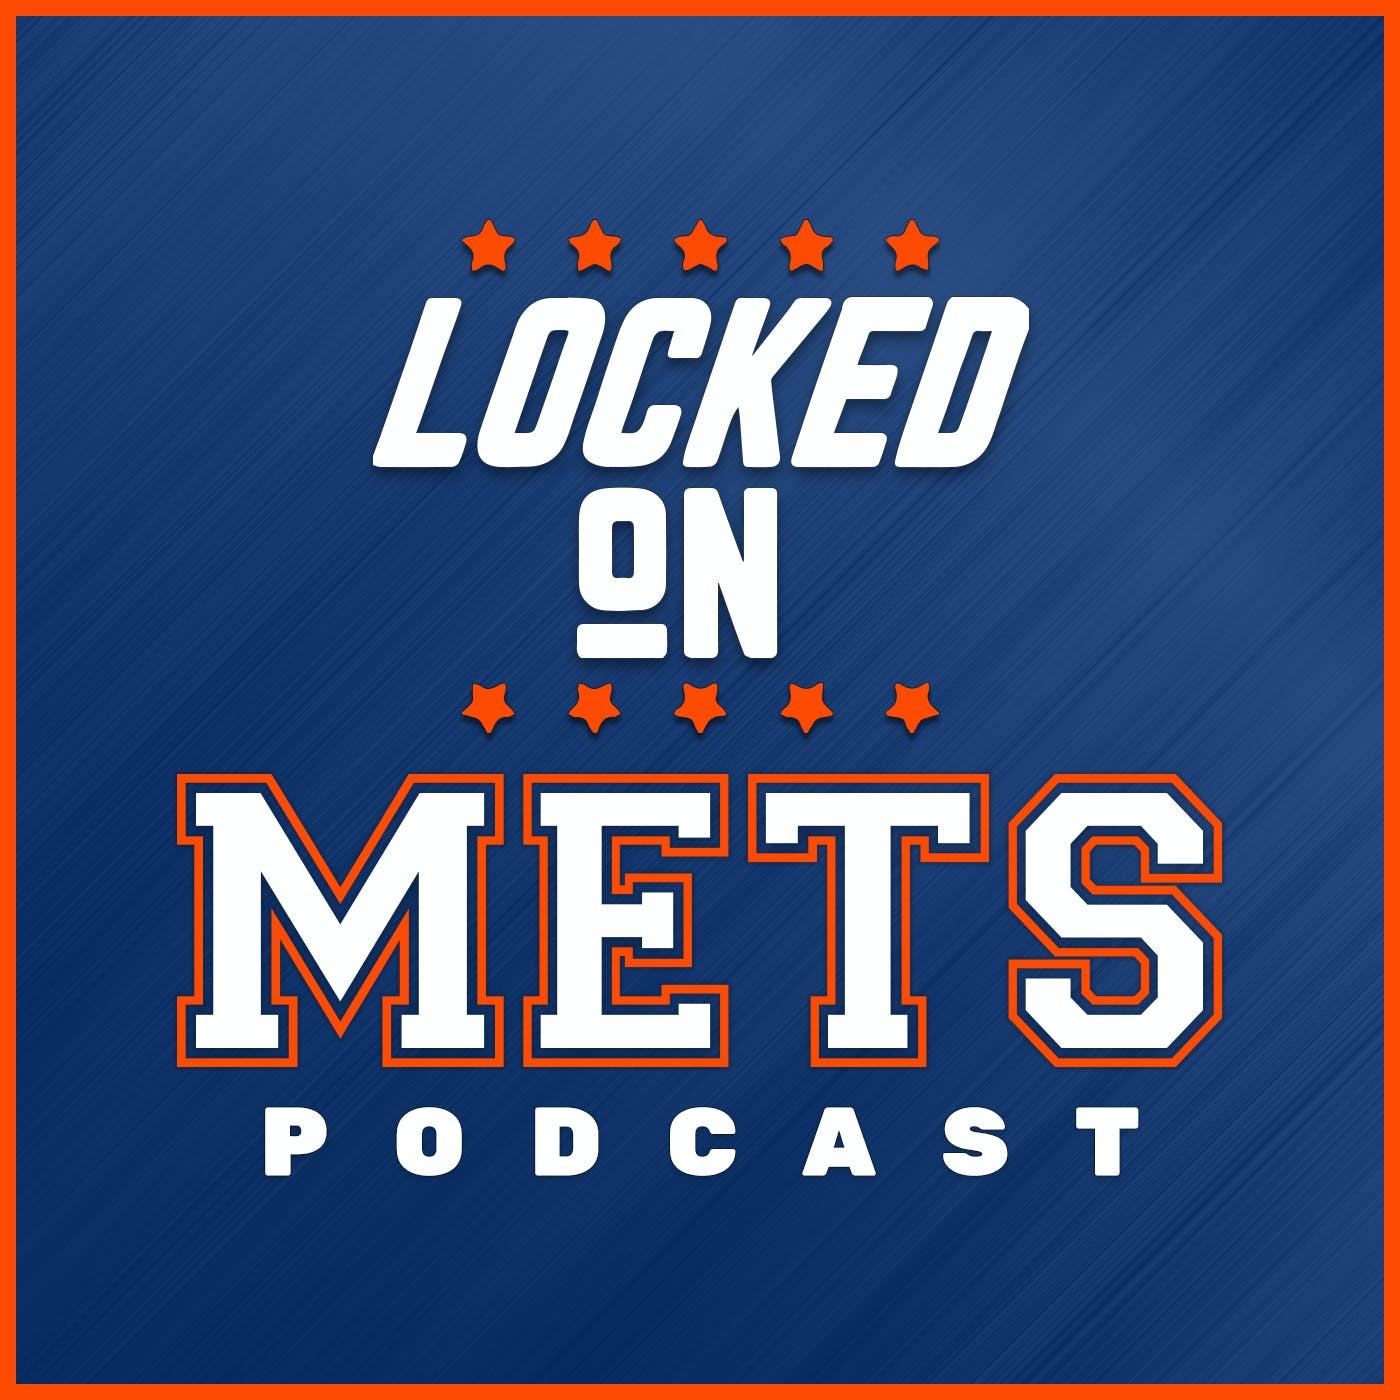 Show poster of Locked On Mets - Daily Podcast On The New York Mets